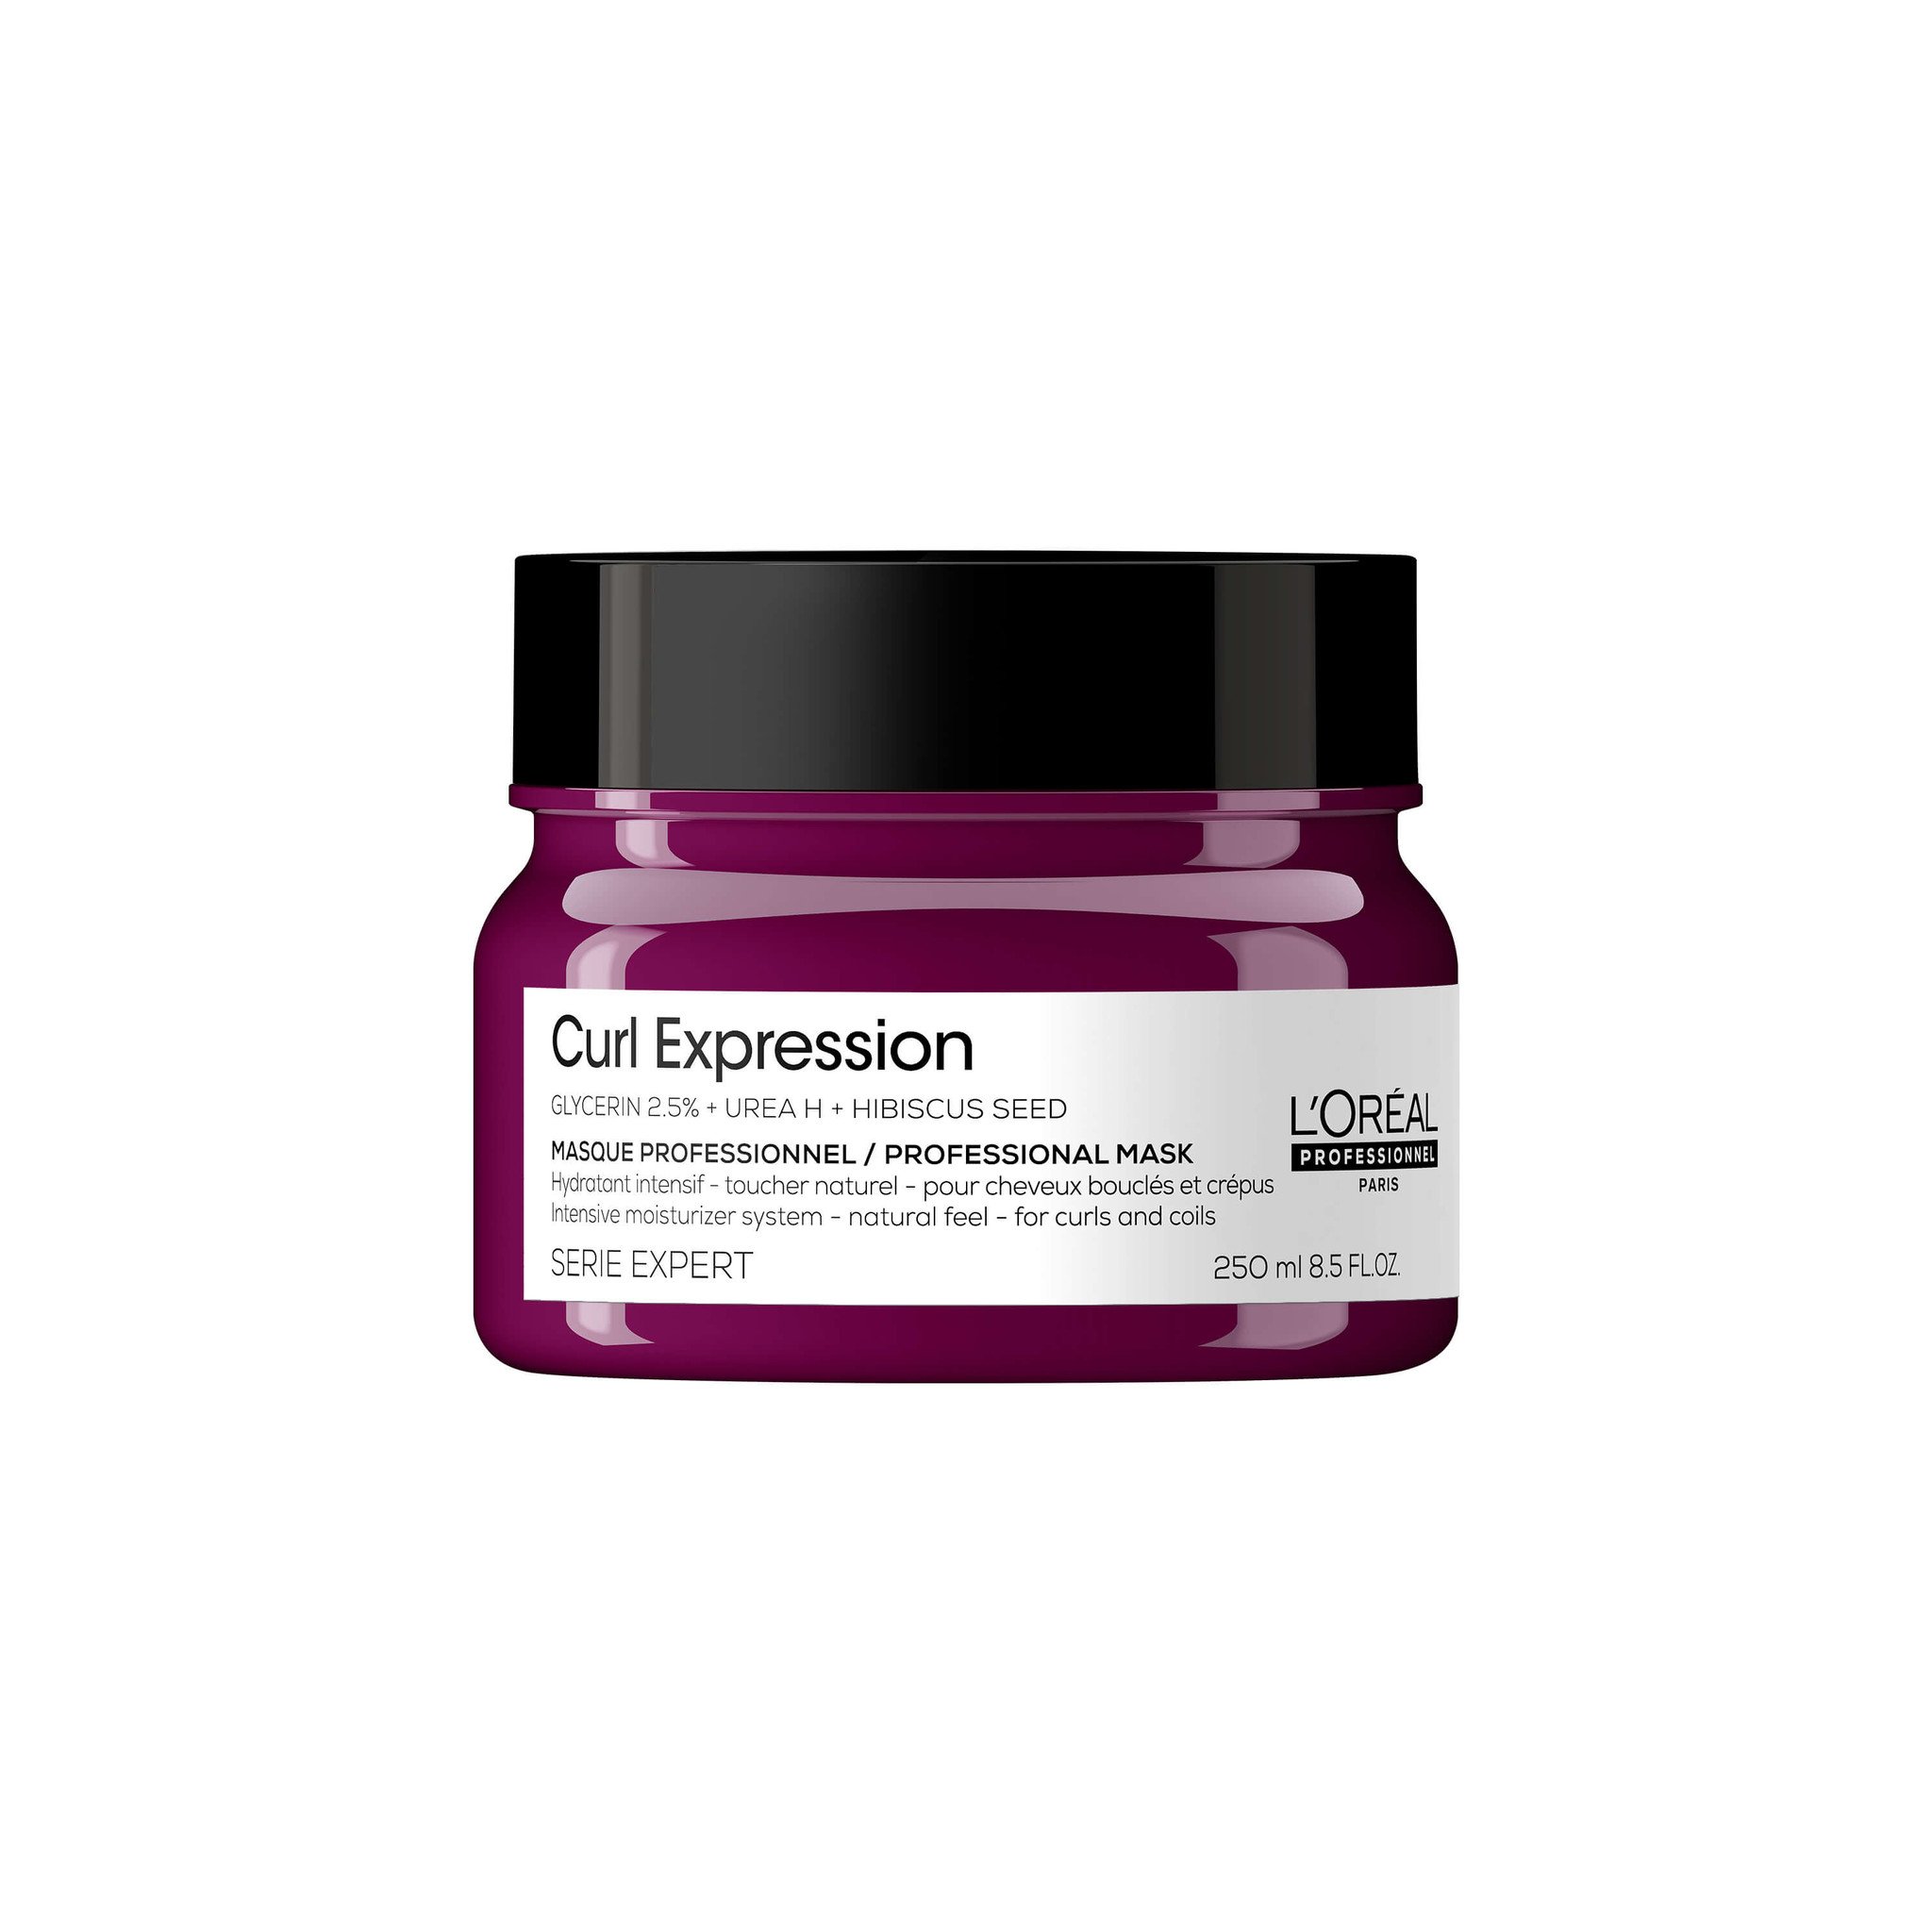 SERIE EXPERT | CURL EXPRESSION Masque